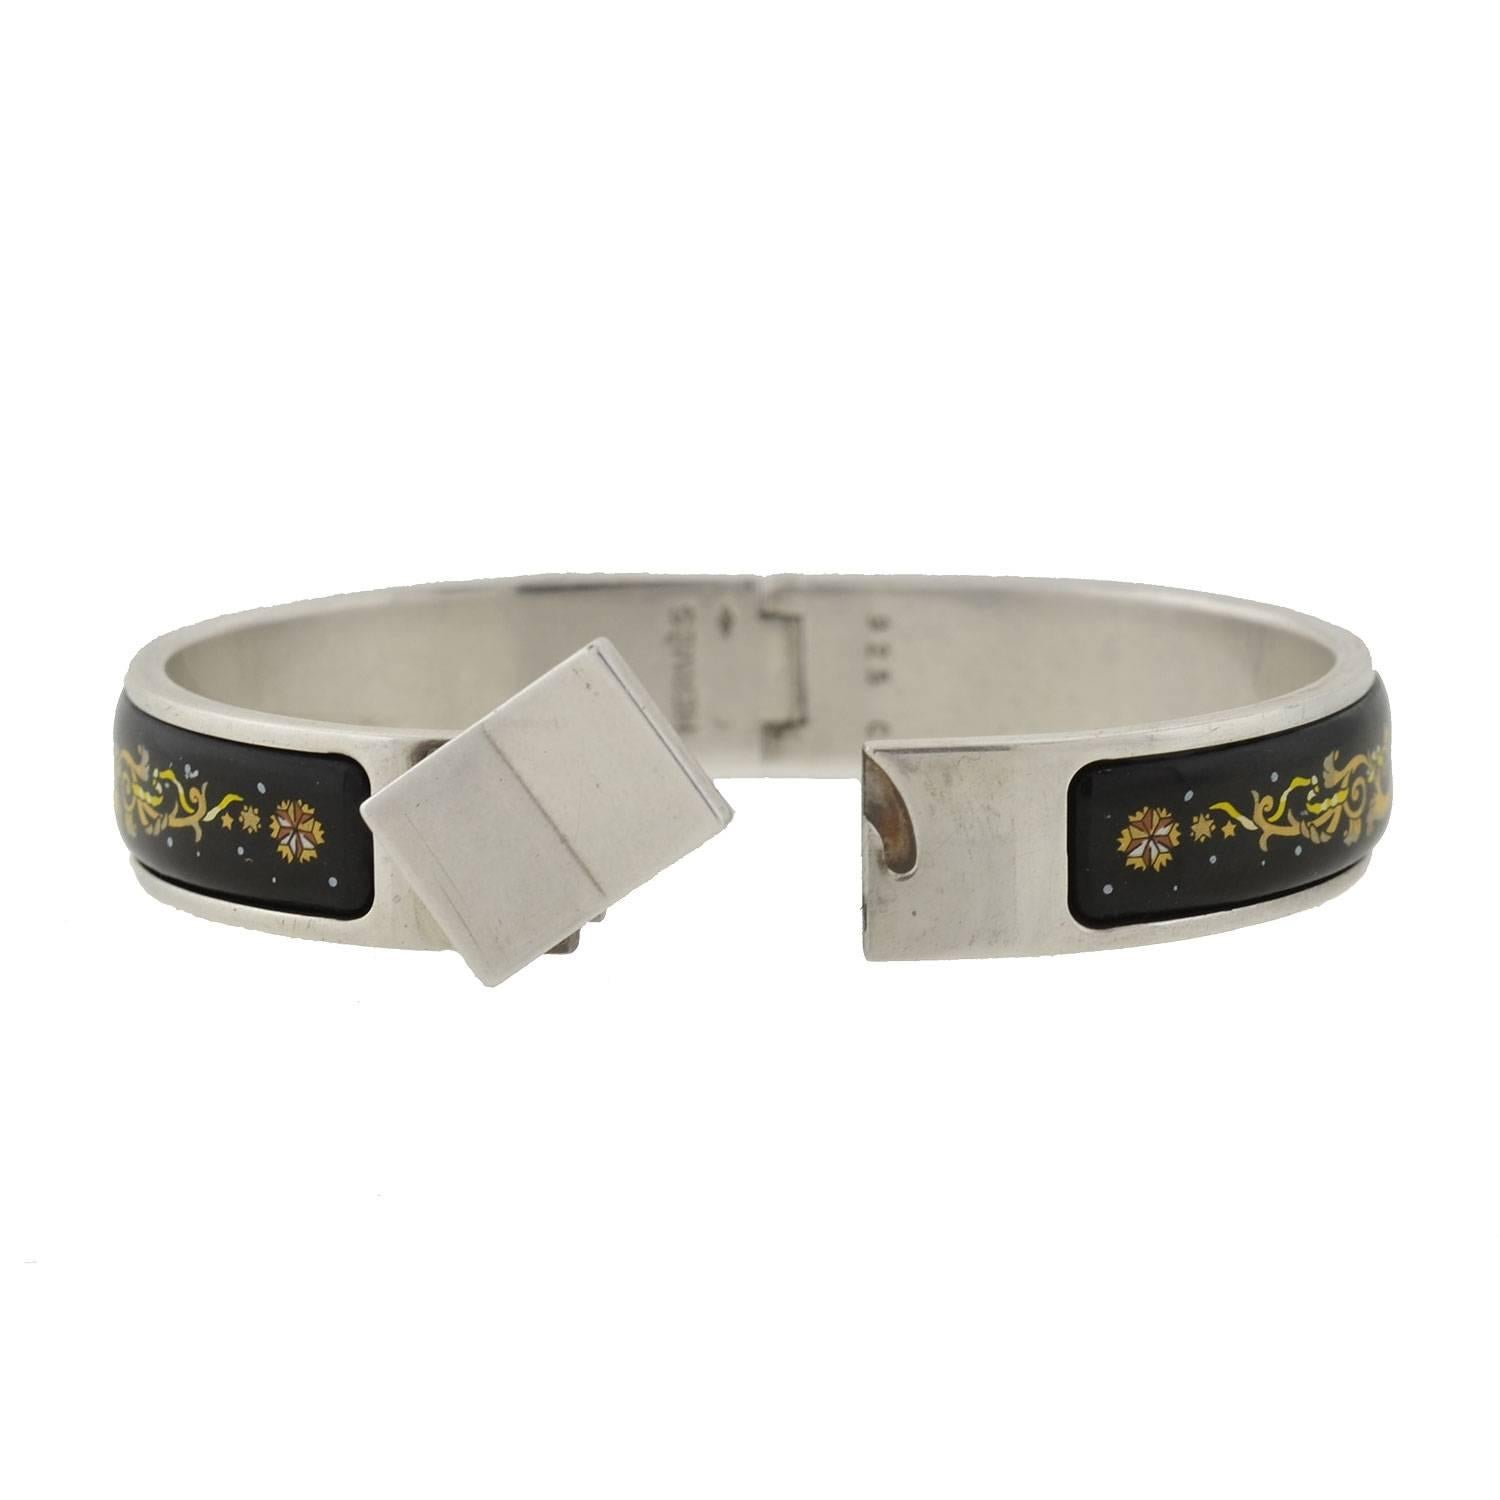 This vintage bracelet from the 1970s is a fabulous piece by legendary designer Hermes! Most of these bangles were not produced in sterling silver, which makes this piece especially desirable. The stylish bangle features an elaborate enamel surface